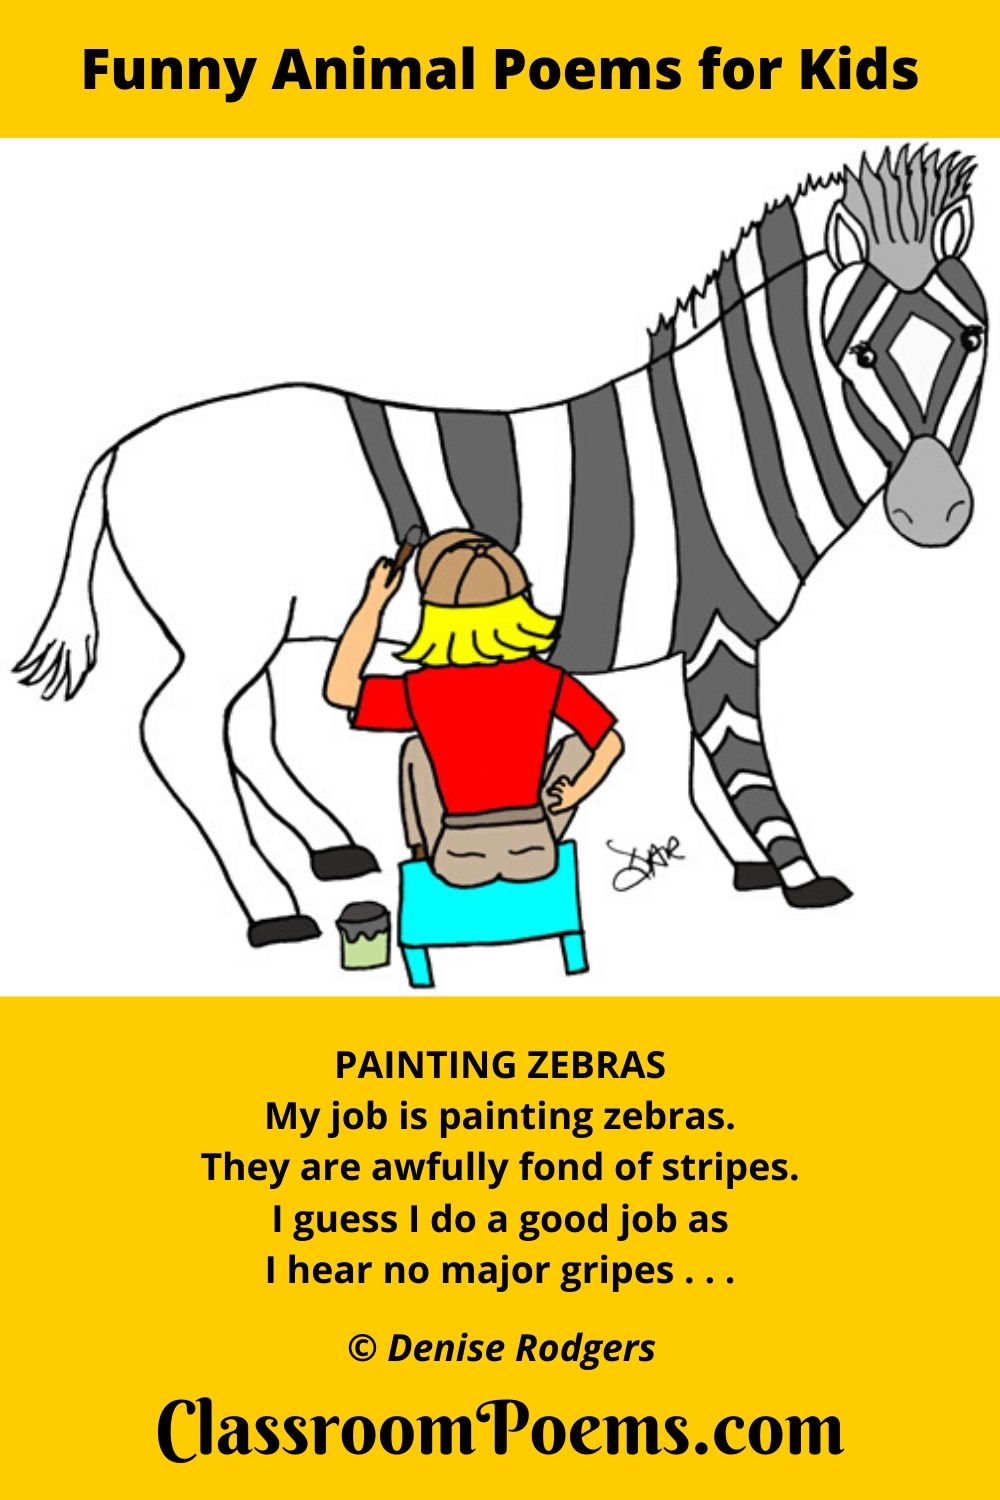 Painting Zebras, a funny animal poem for kids by Denise Rodgers on ClassroomPoems.com.